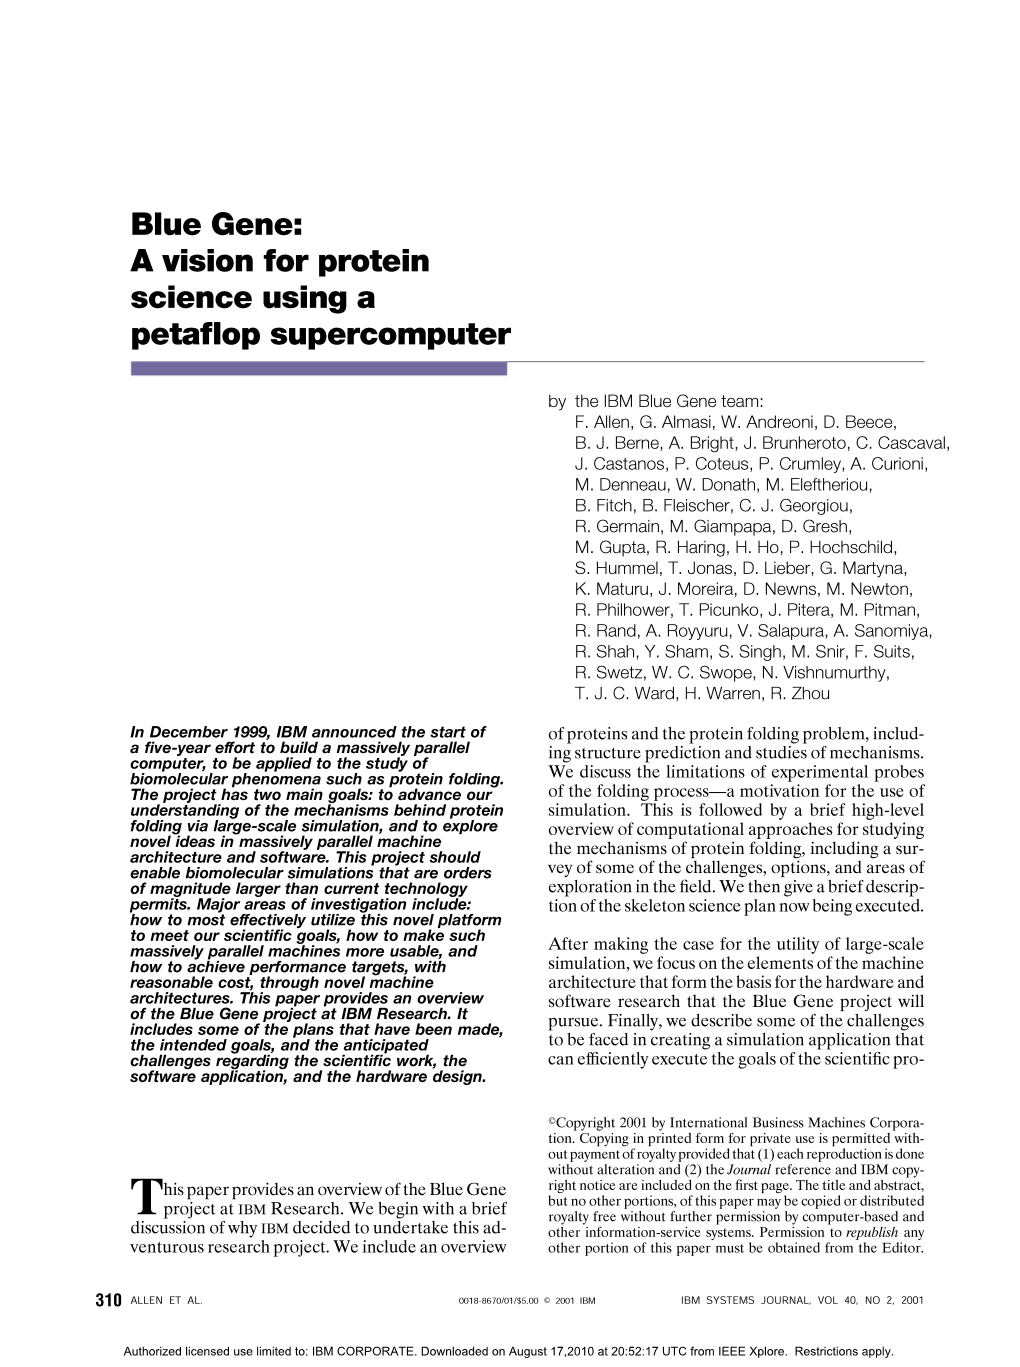 Blue Gene: a Vision for Protein Science Using a Petaflop Supercomputer